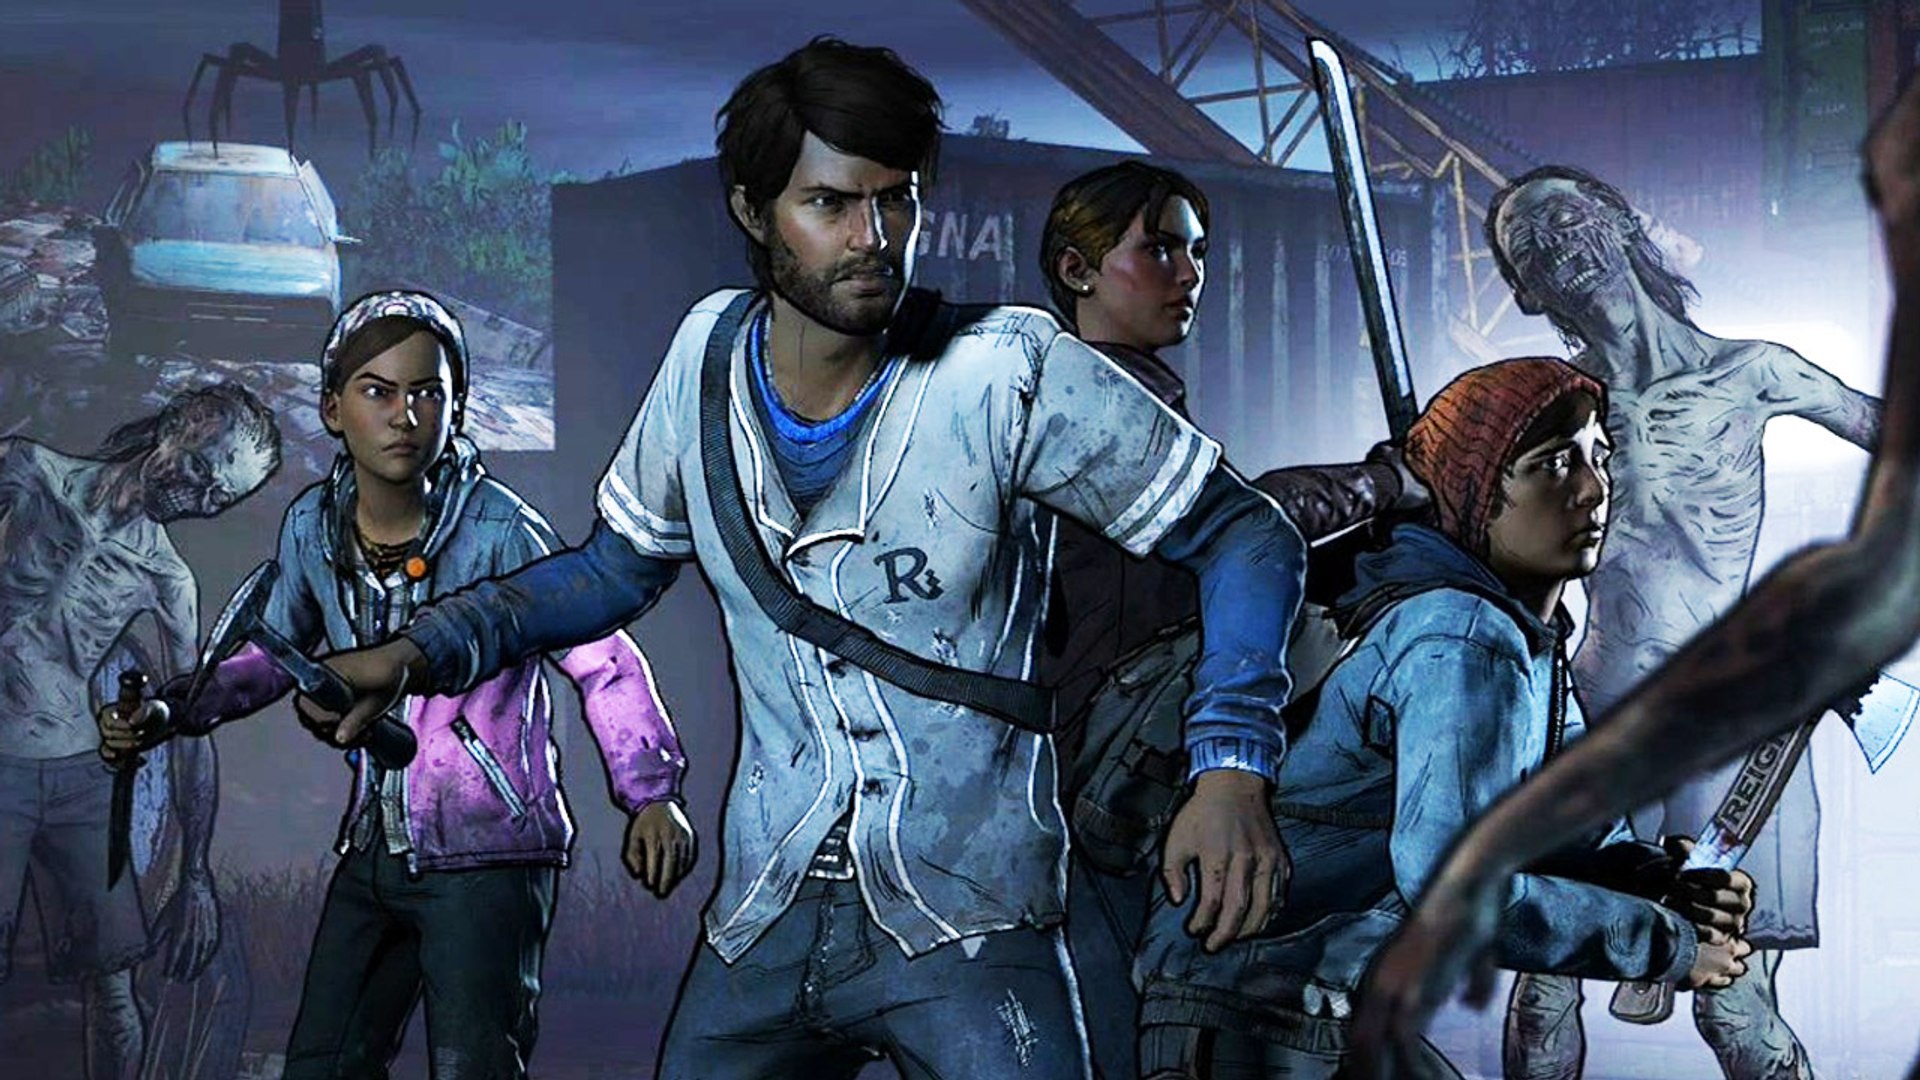 Игра dead frontier. TWD A New Frontier. The Walking Dead: a New Frontier - Episode 1. The Walking Dead Нью Фронтир. Ходячие the New Frontier.